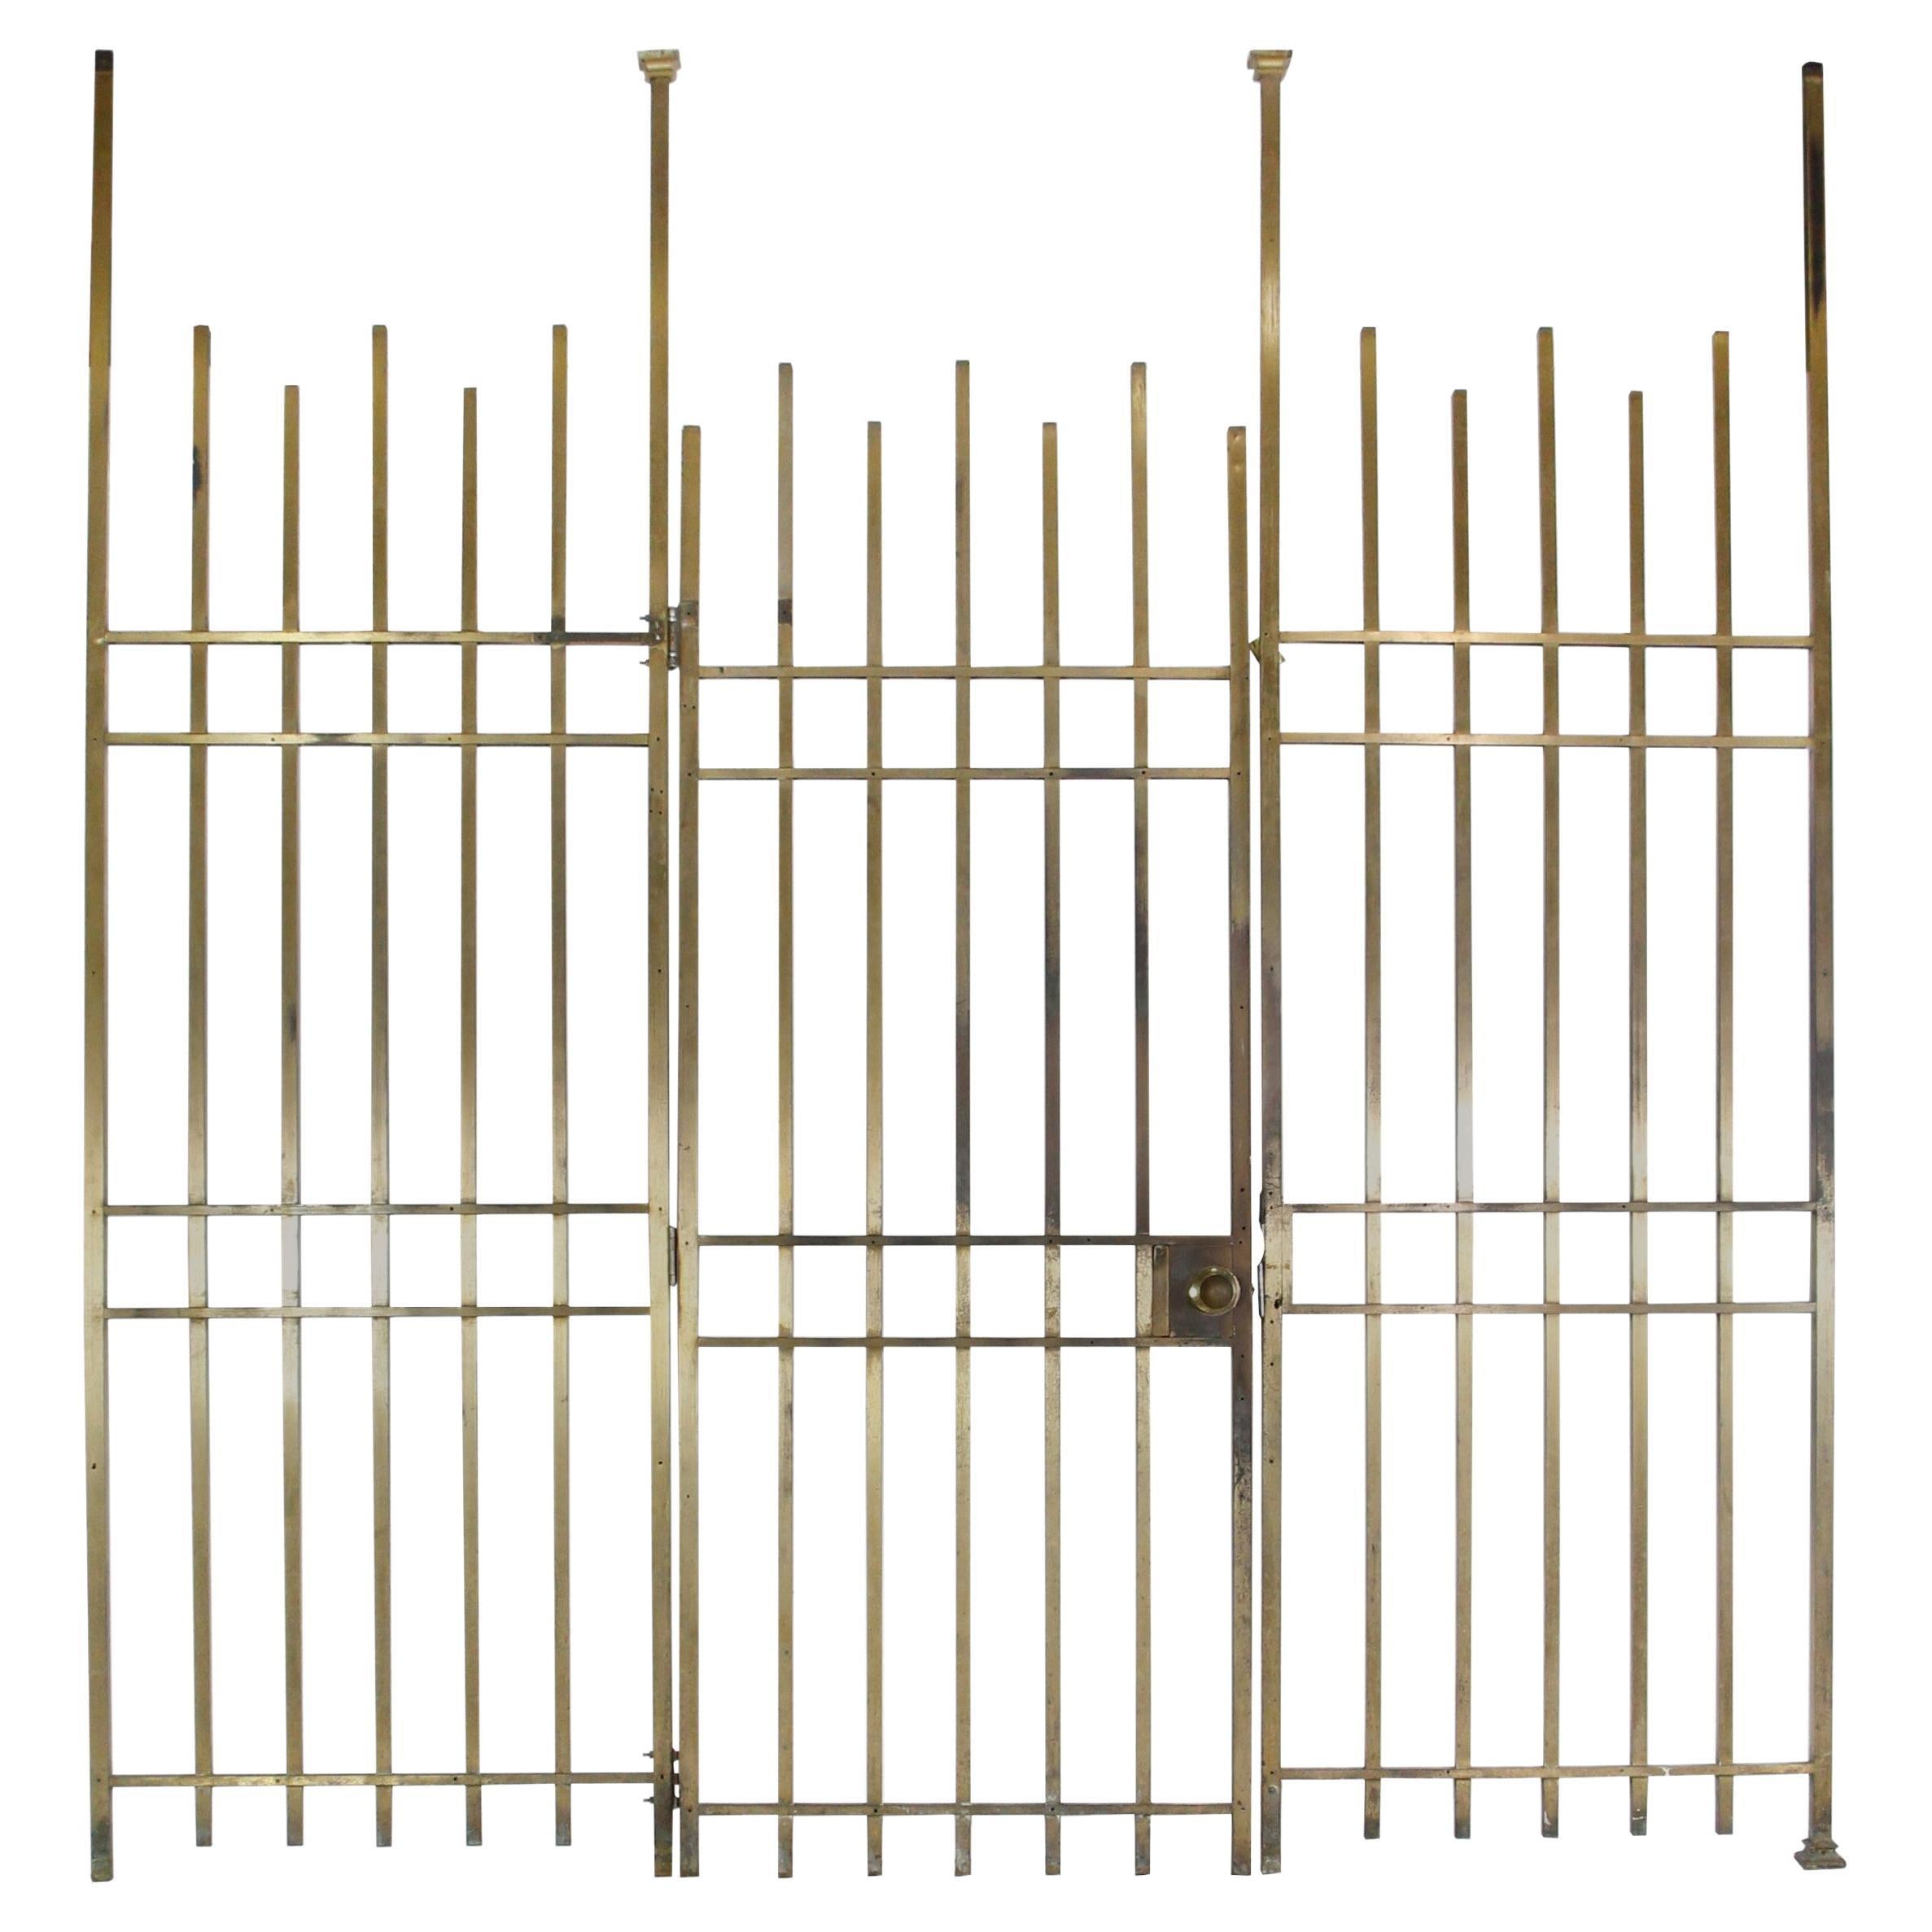 Mid-Century Modern Brass Bank Vault Bars and Gate For Sale